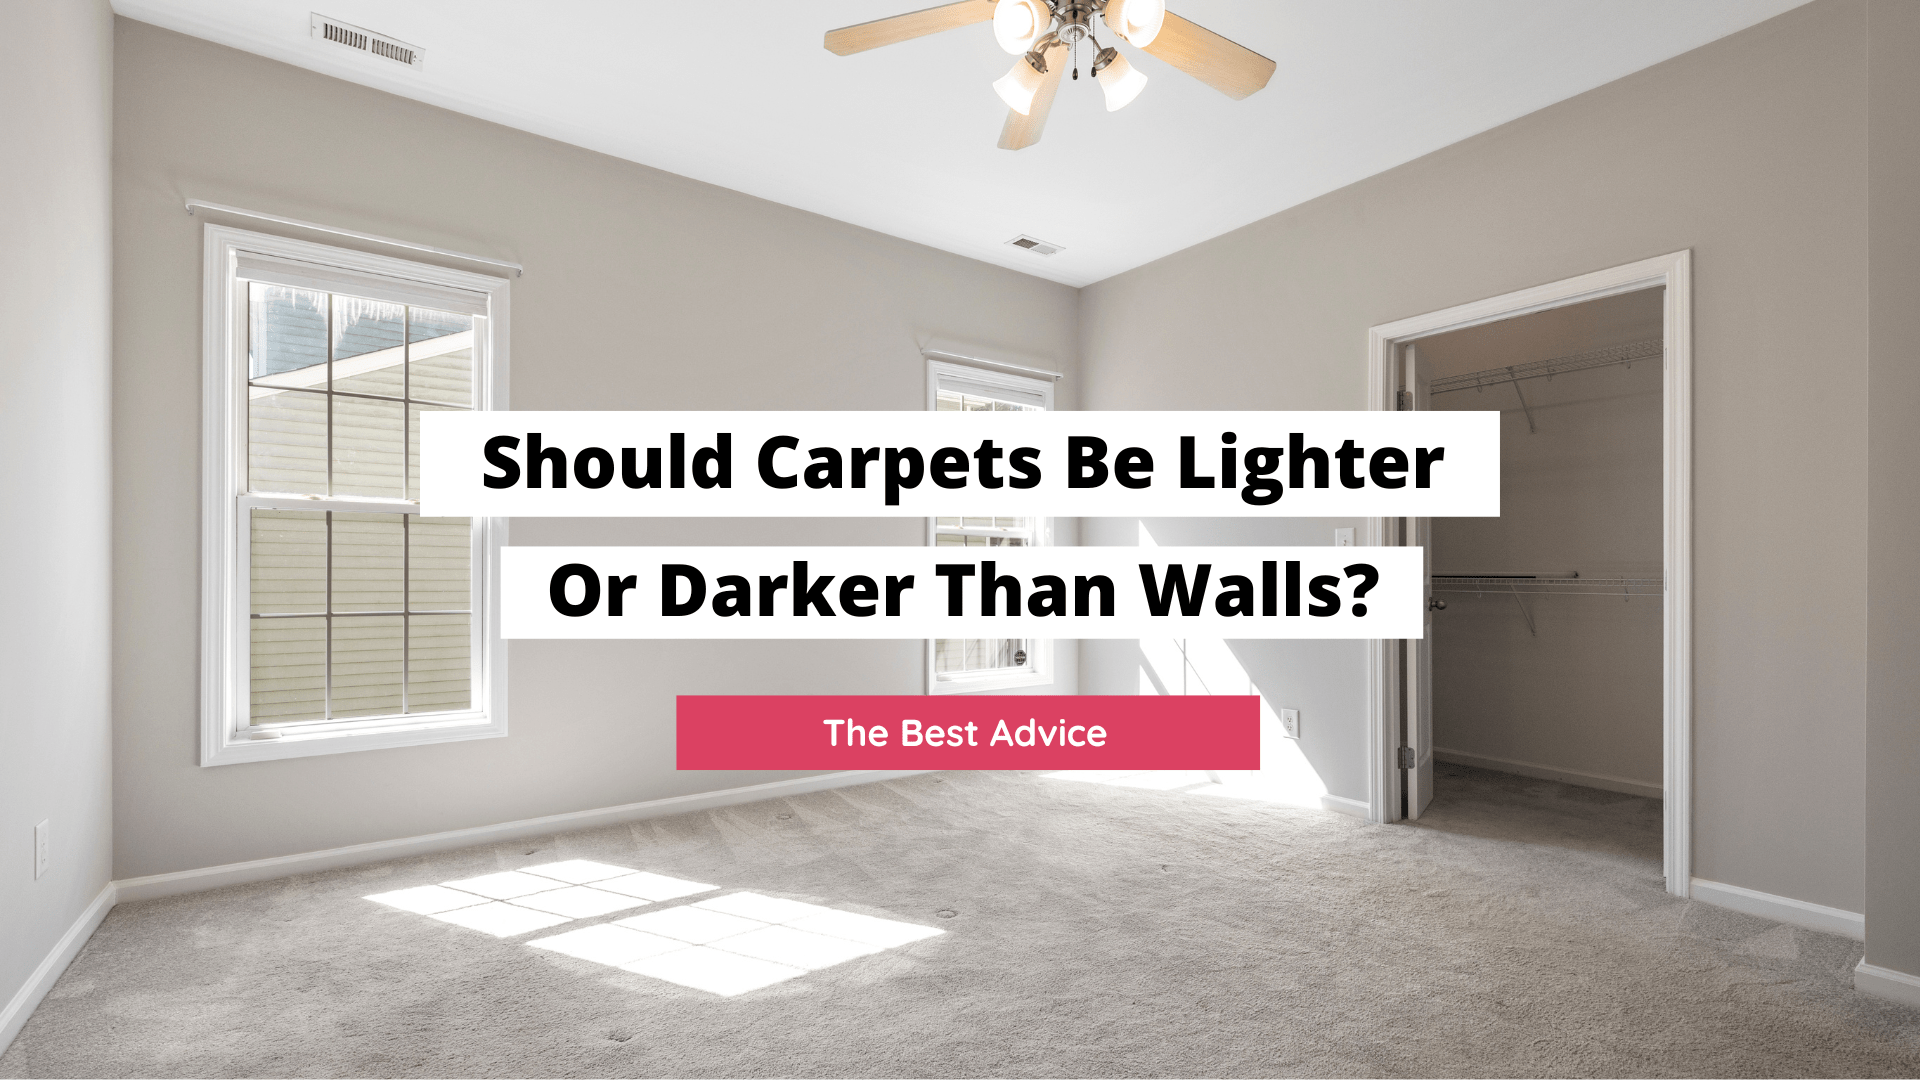 Why choose carpet that's lighter than walls